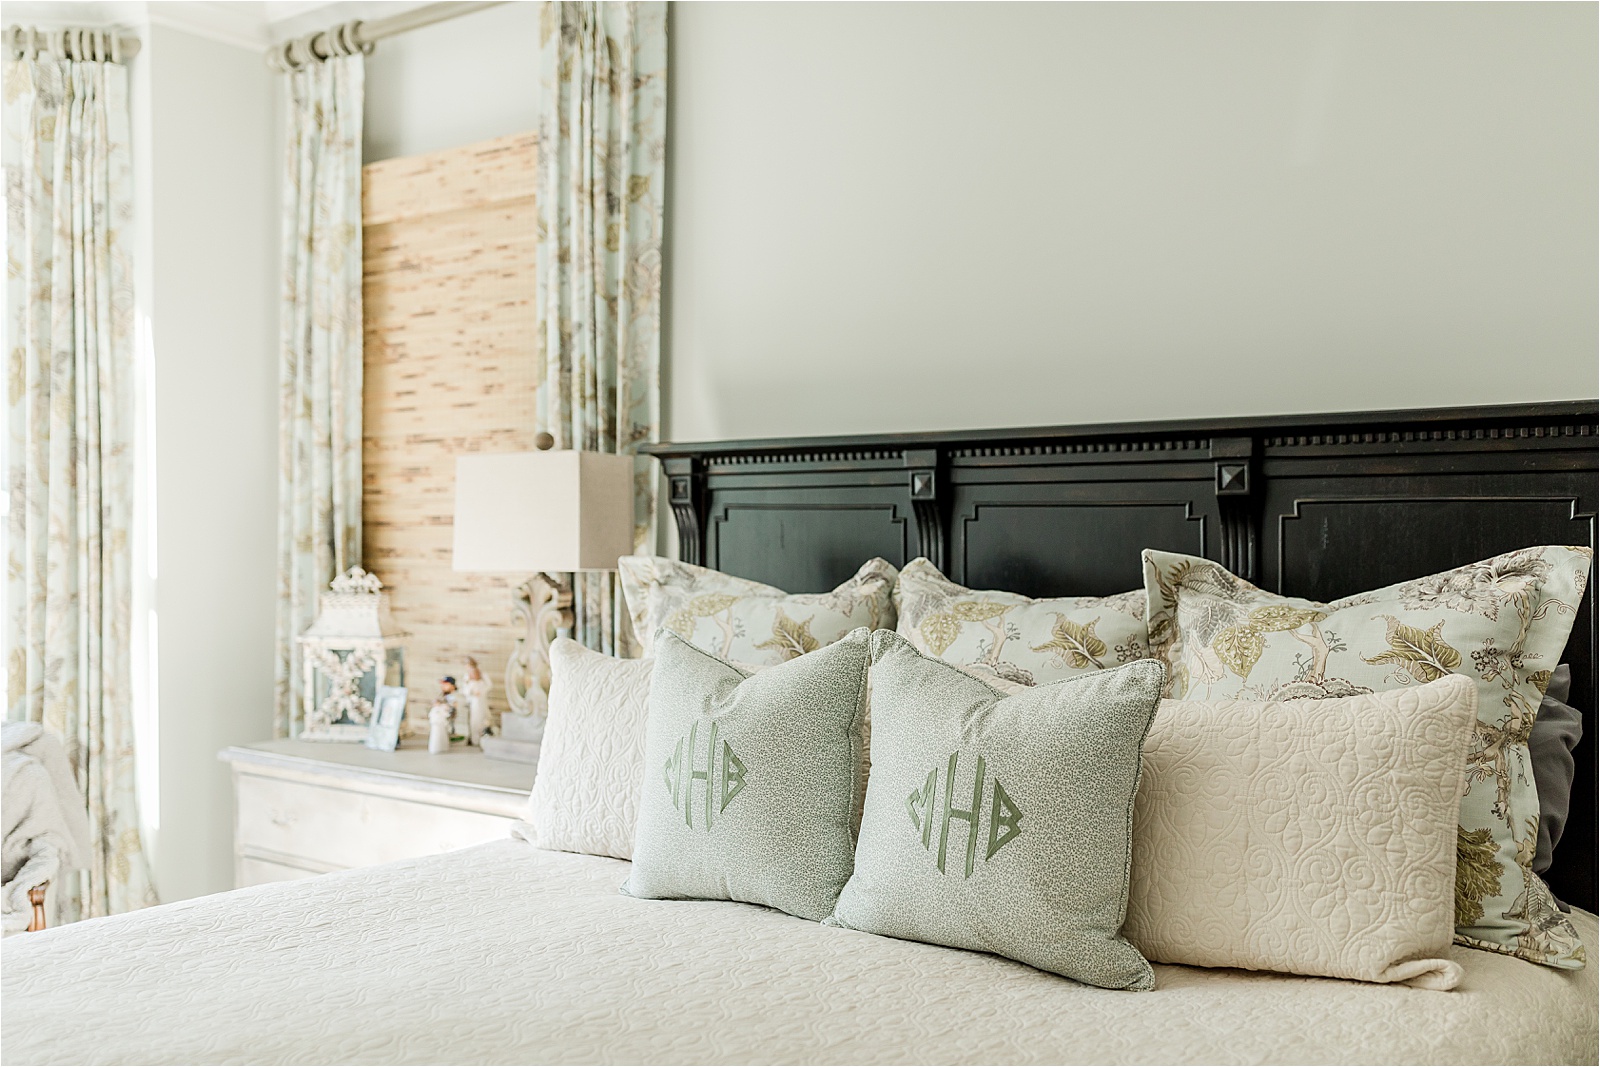 Pale green and tan master bedroom with monogrammed pillow and floral pattern accents